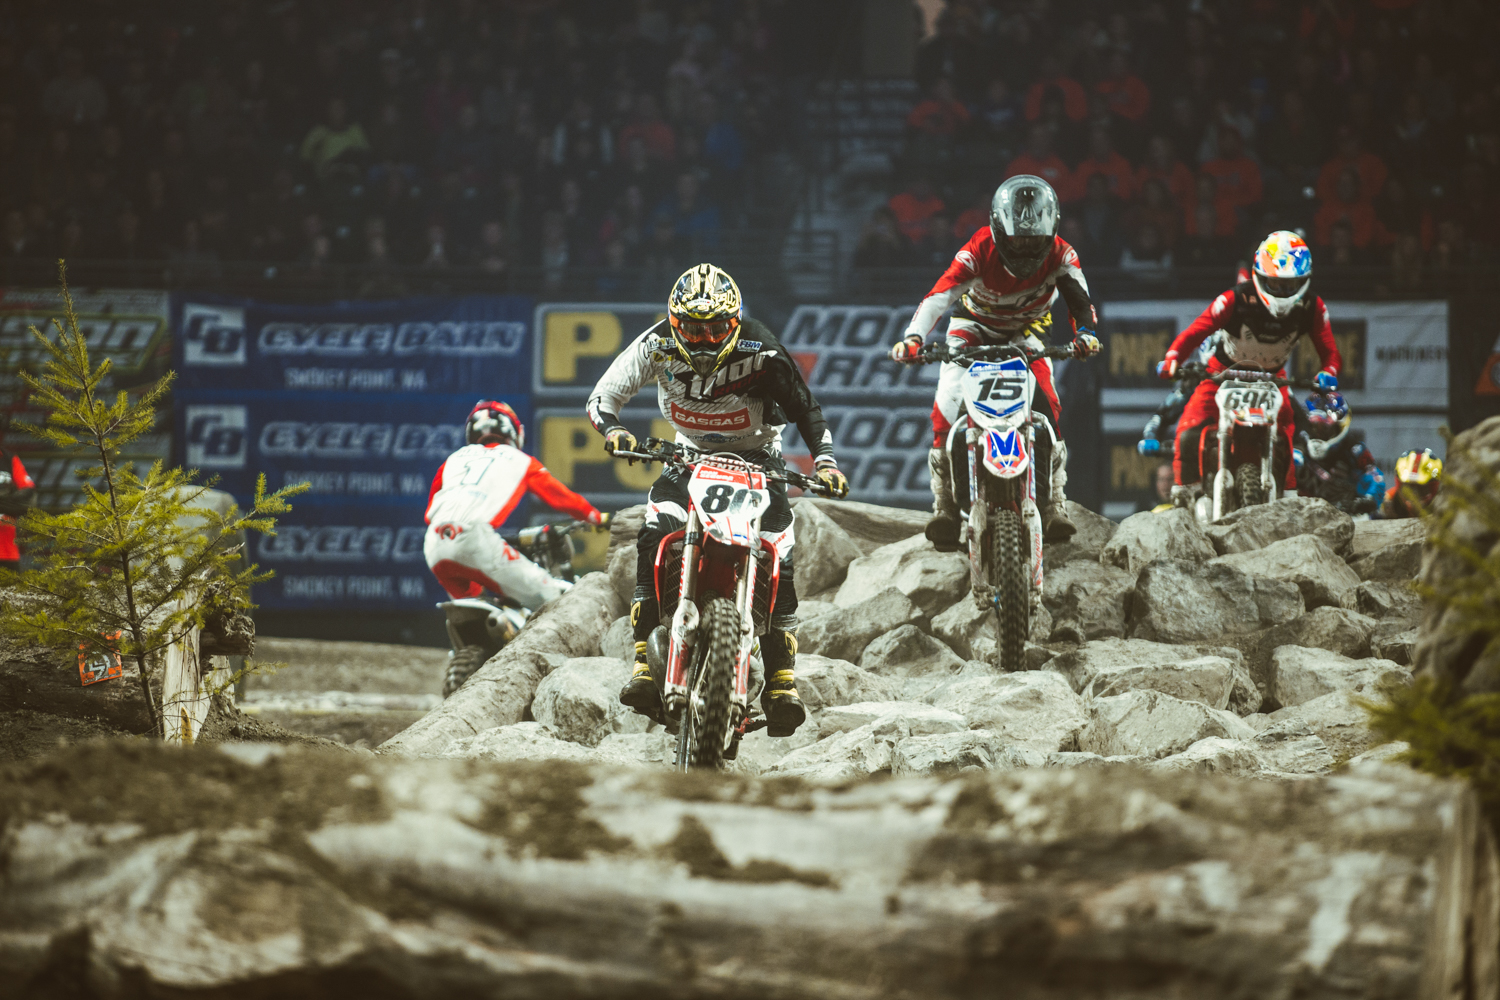 Endurocross kicks off six round series in PV Aug. 25 The Daily